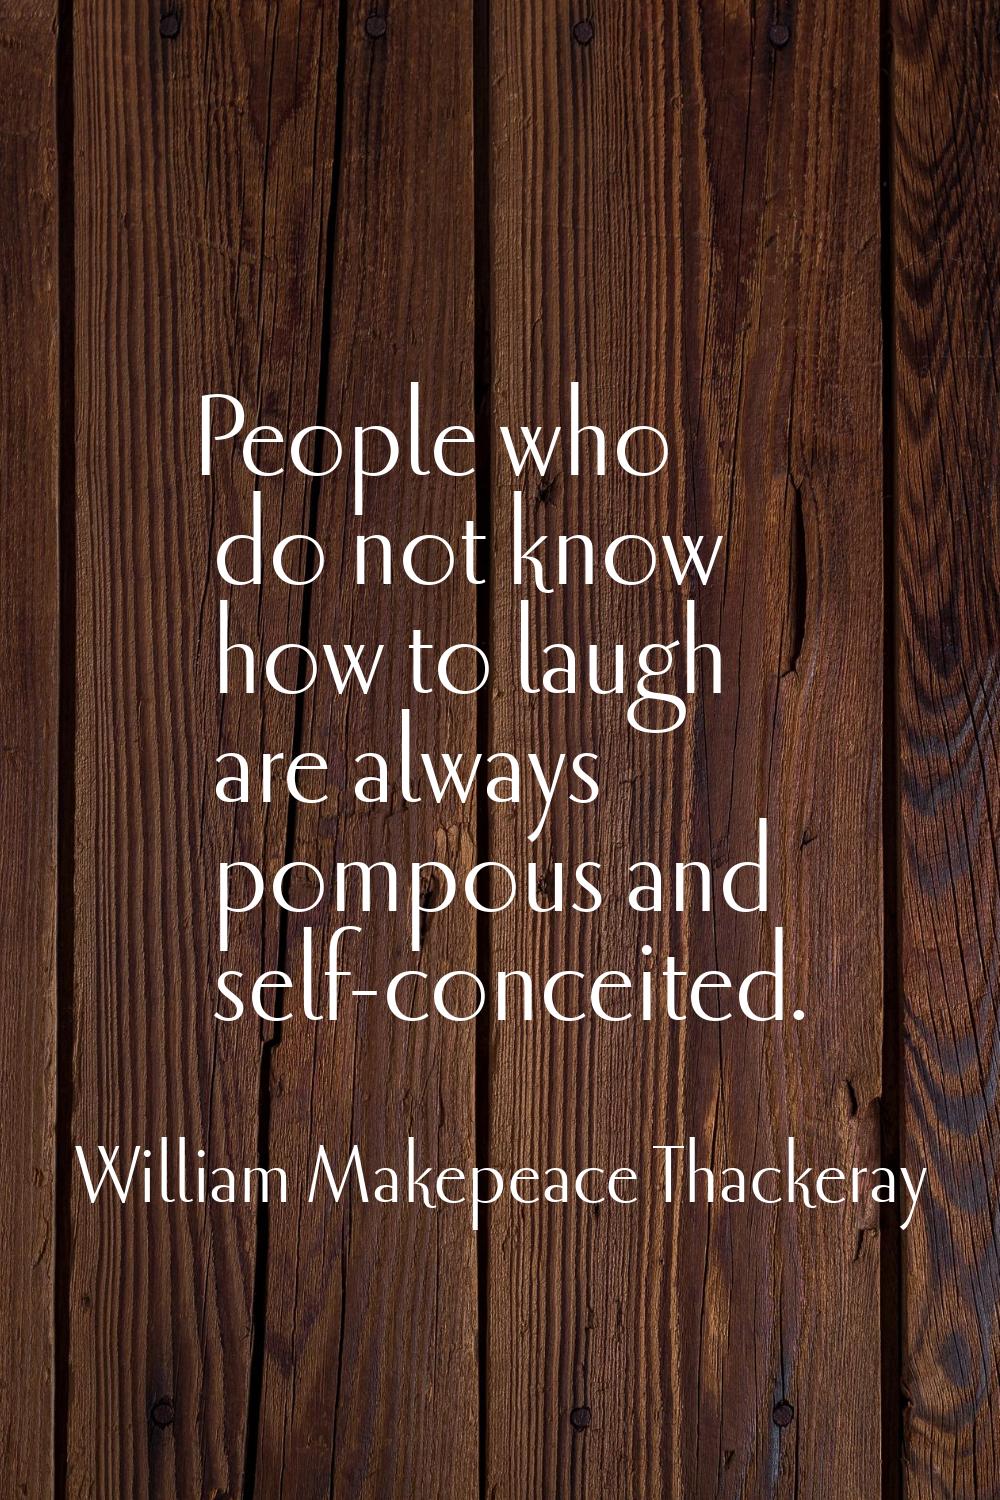 People who do not know how to laugh are always pompous and self-conceited.